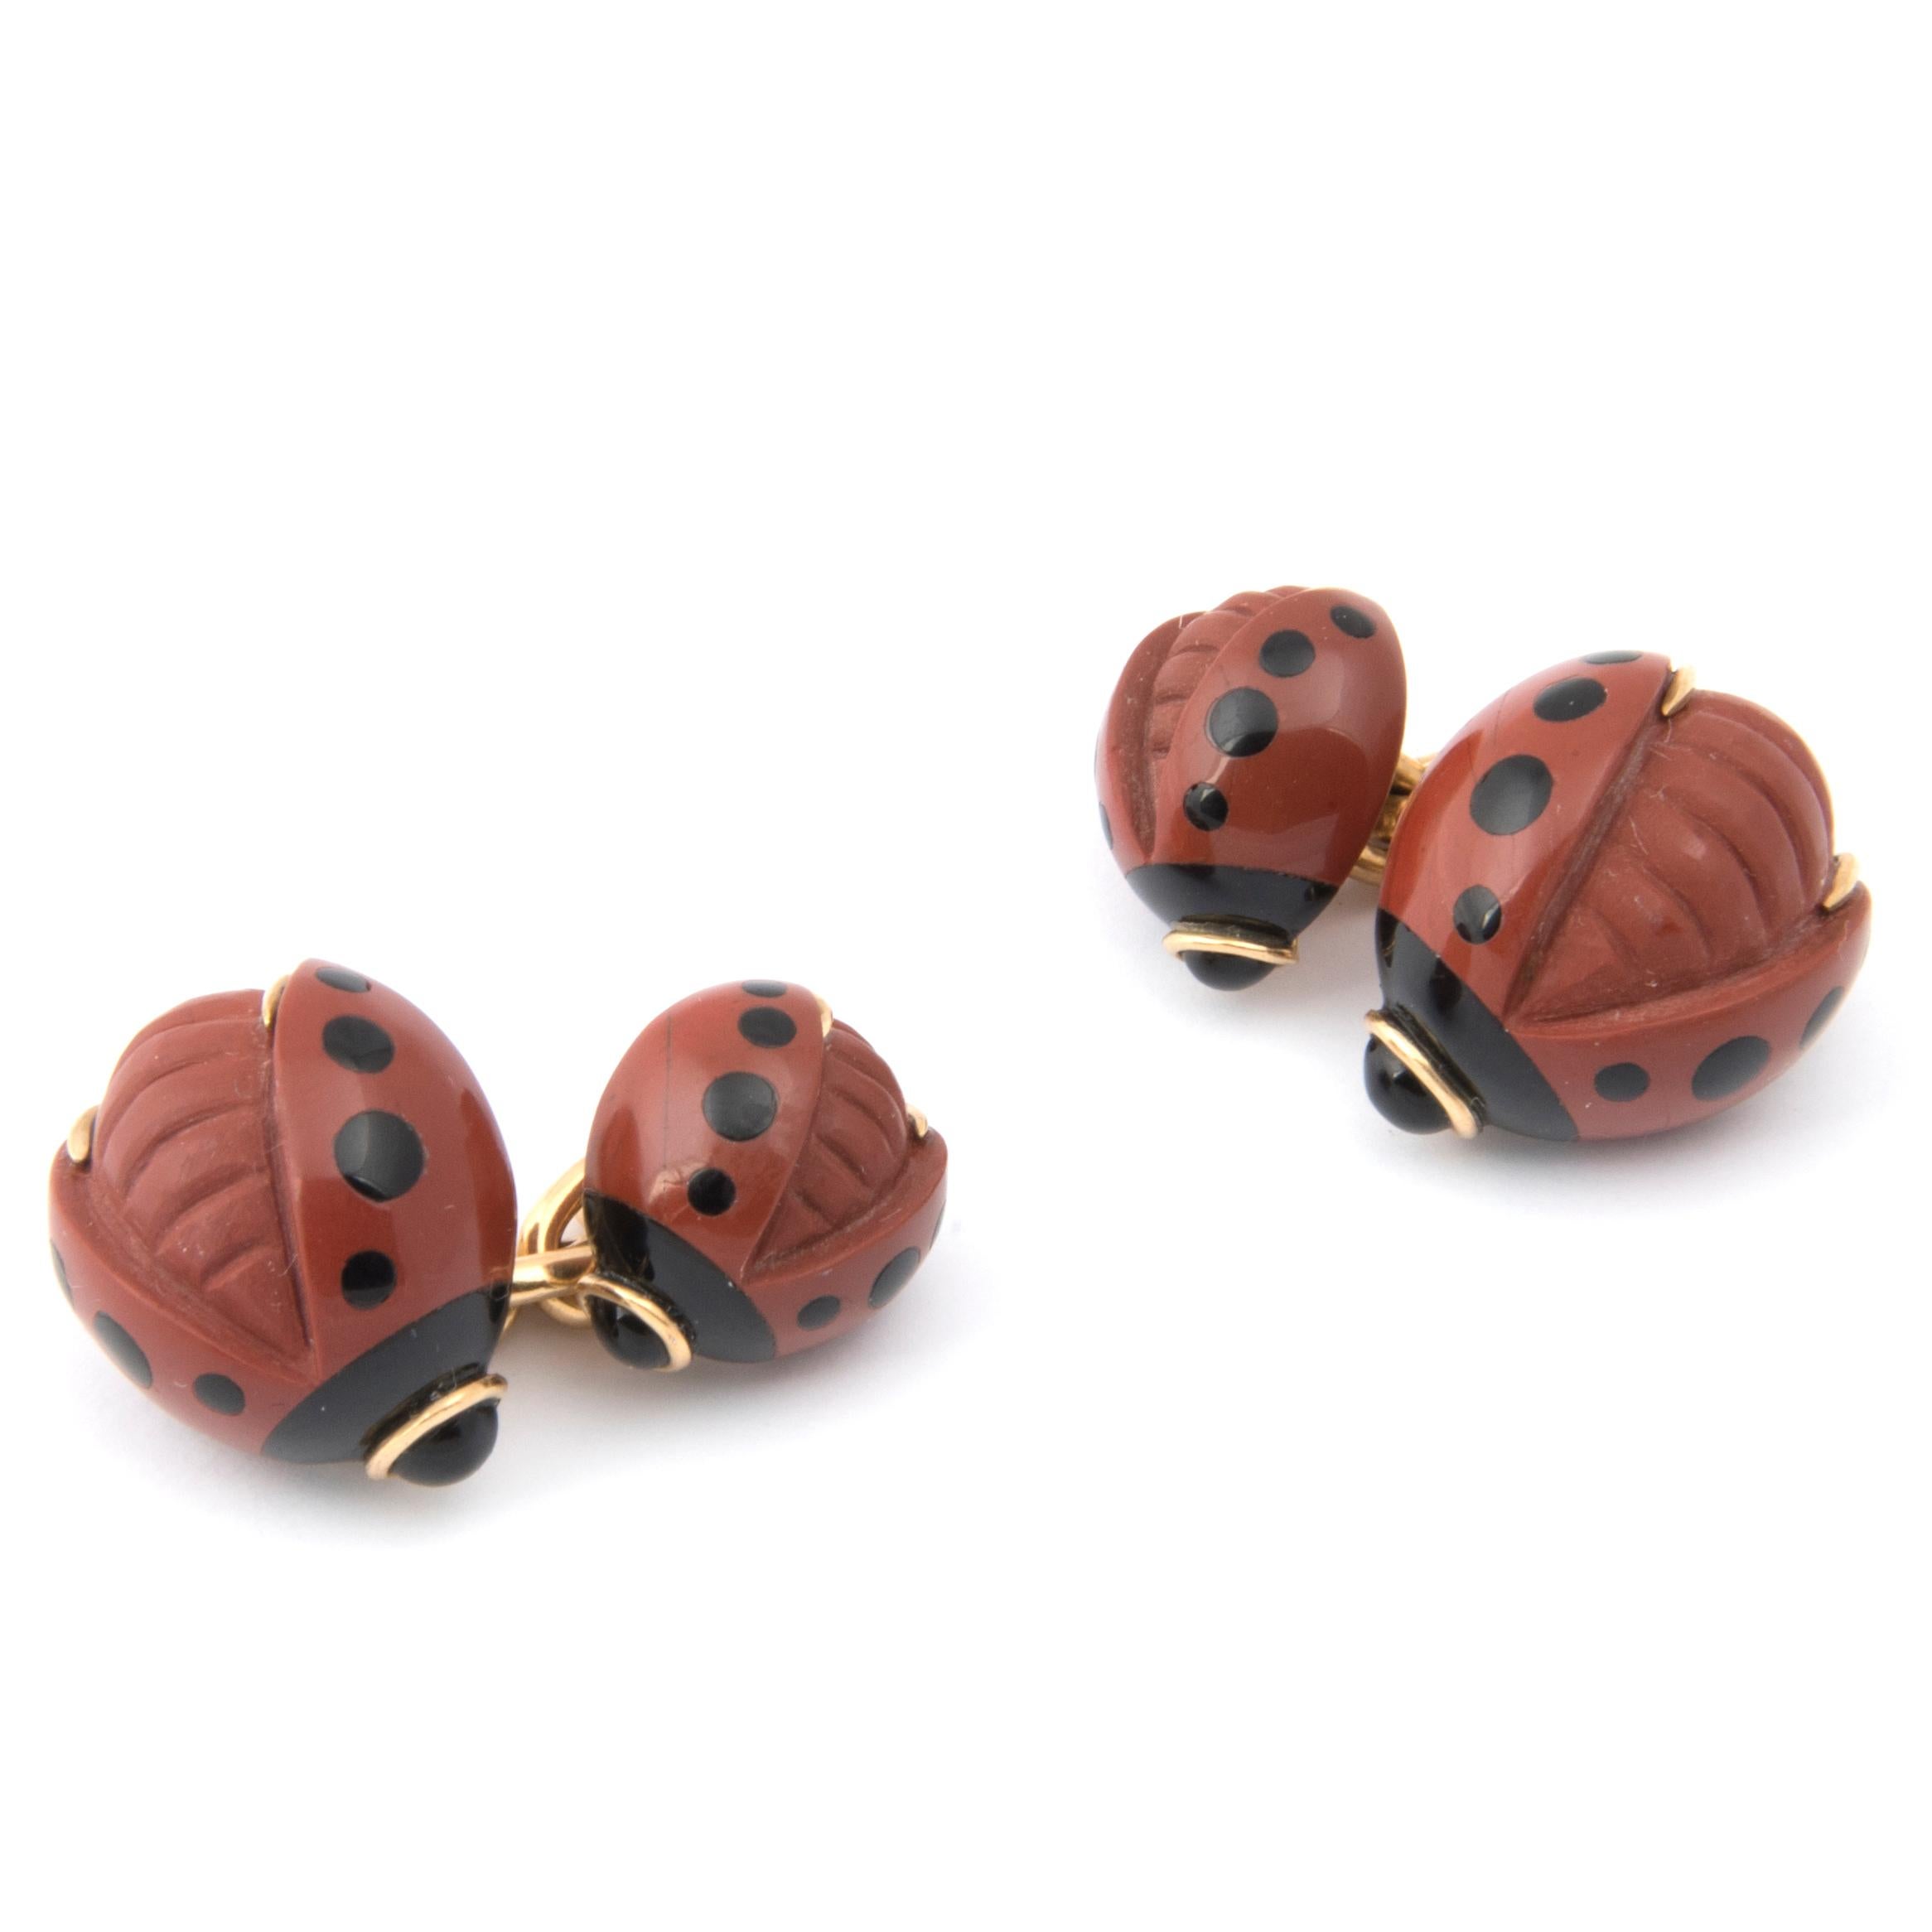 Pair of cufflinks designed as two ladybirds in red hard stone inlaid with black onyx, joined by an 18k yellow gold chain
French or Italian, 20th century

